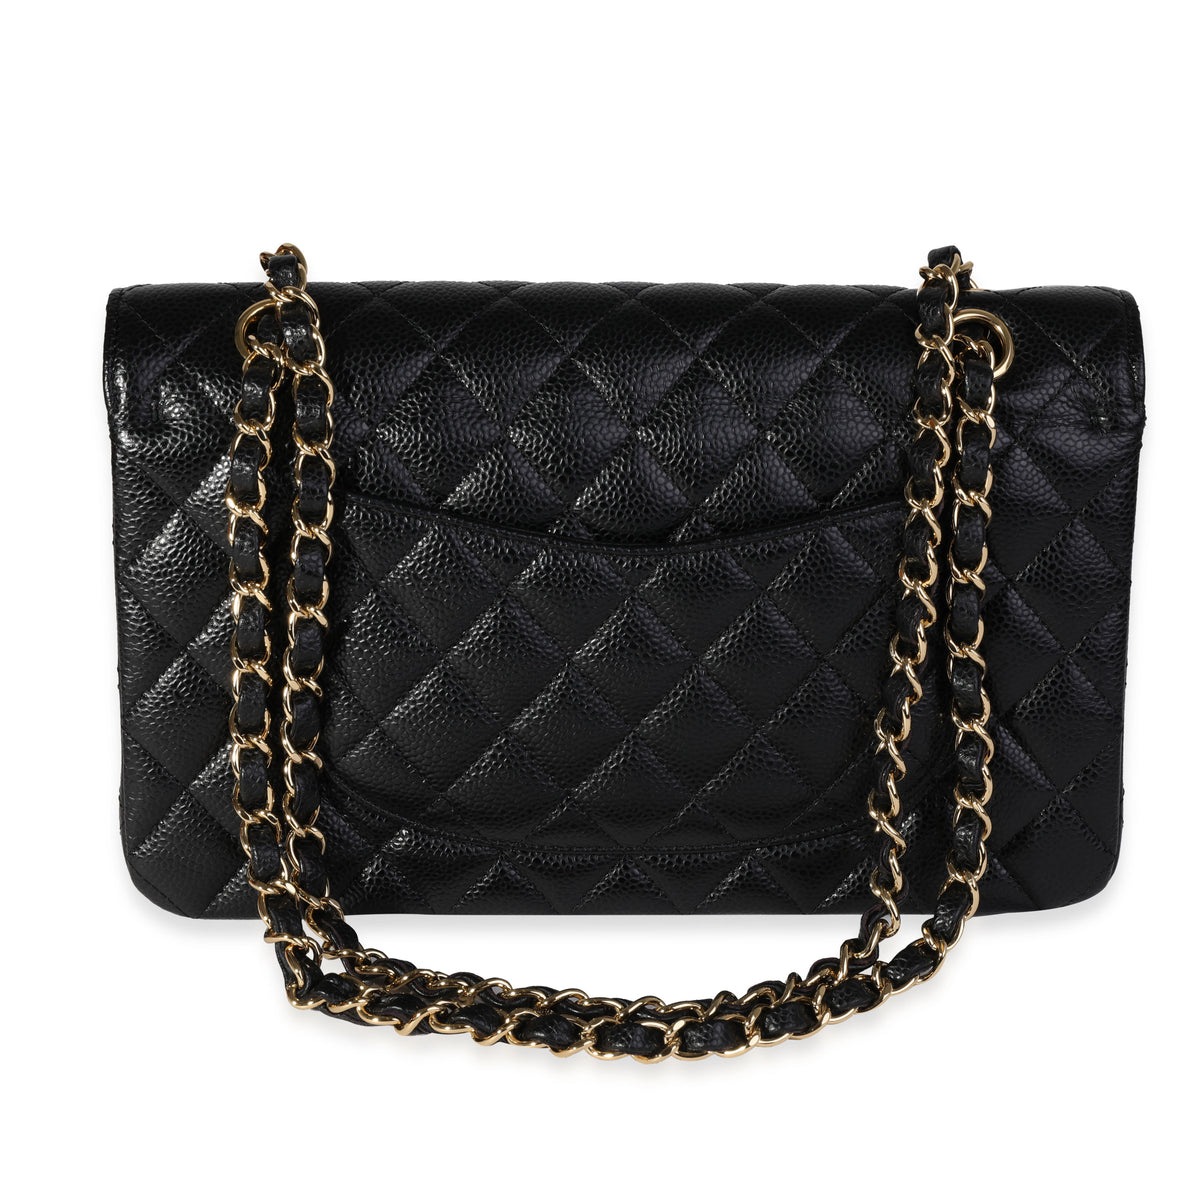 Chanel East West Classic Quilted Flap Bag in Black Caviar with Silver  Hardware - SOLD